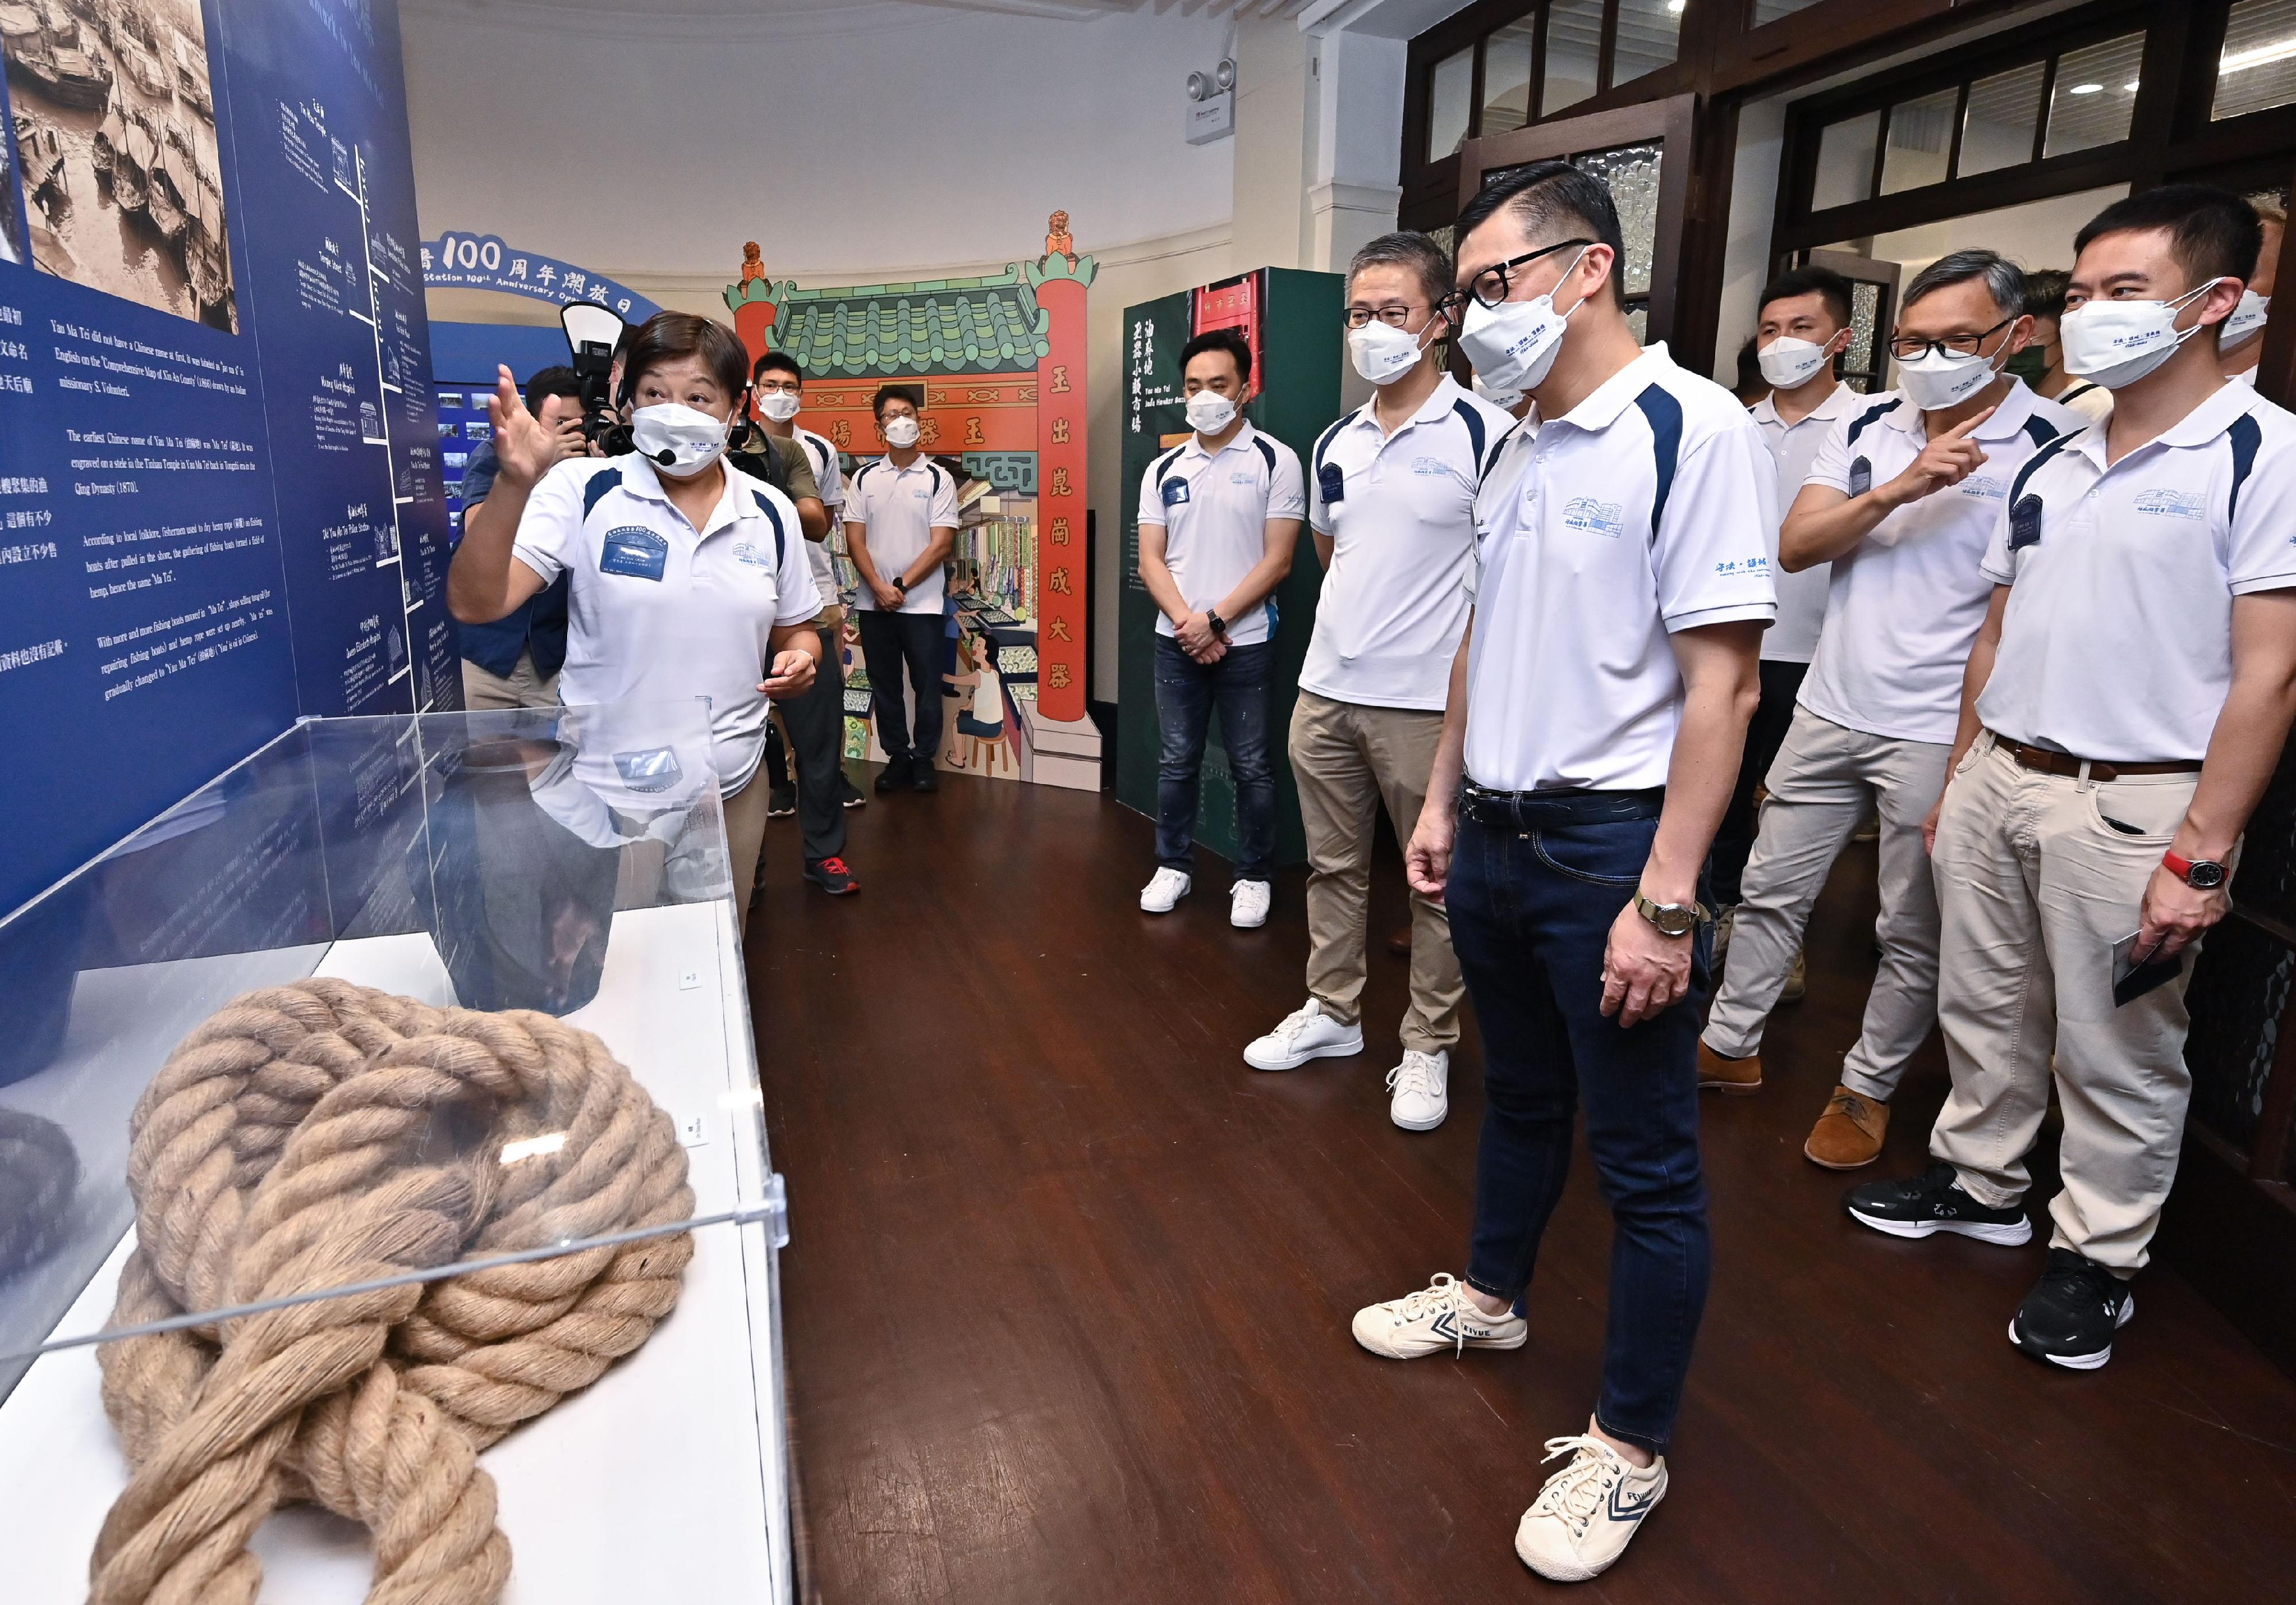 The “Old Yau Ma Tei Police Station 100th Anniversary Open Days” organised by the Hong Kong Police Force kicks off today (August 6). Photo shows the Secretary for Security, Mr Tang Ping-keung (fourth right); the Commissioner of Police, Mr Siu Chak-yee (fifth right); and other officiating guests touring the exhibition area on the history of Yau Ma Tei.